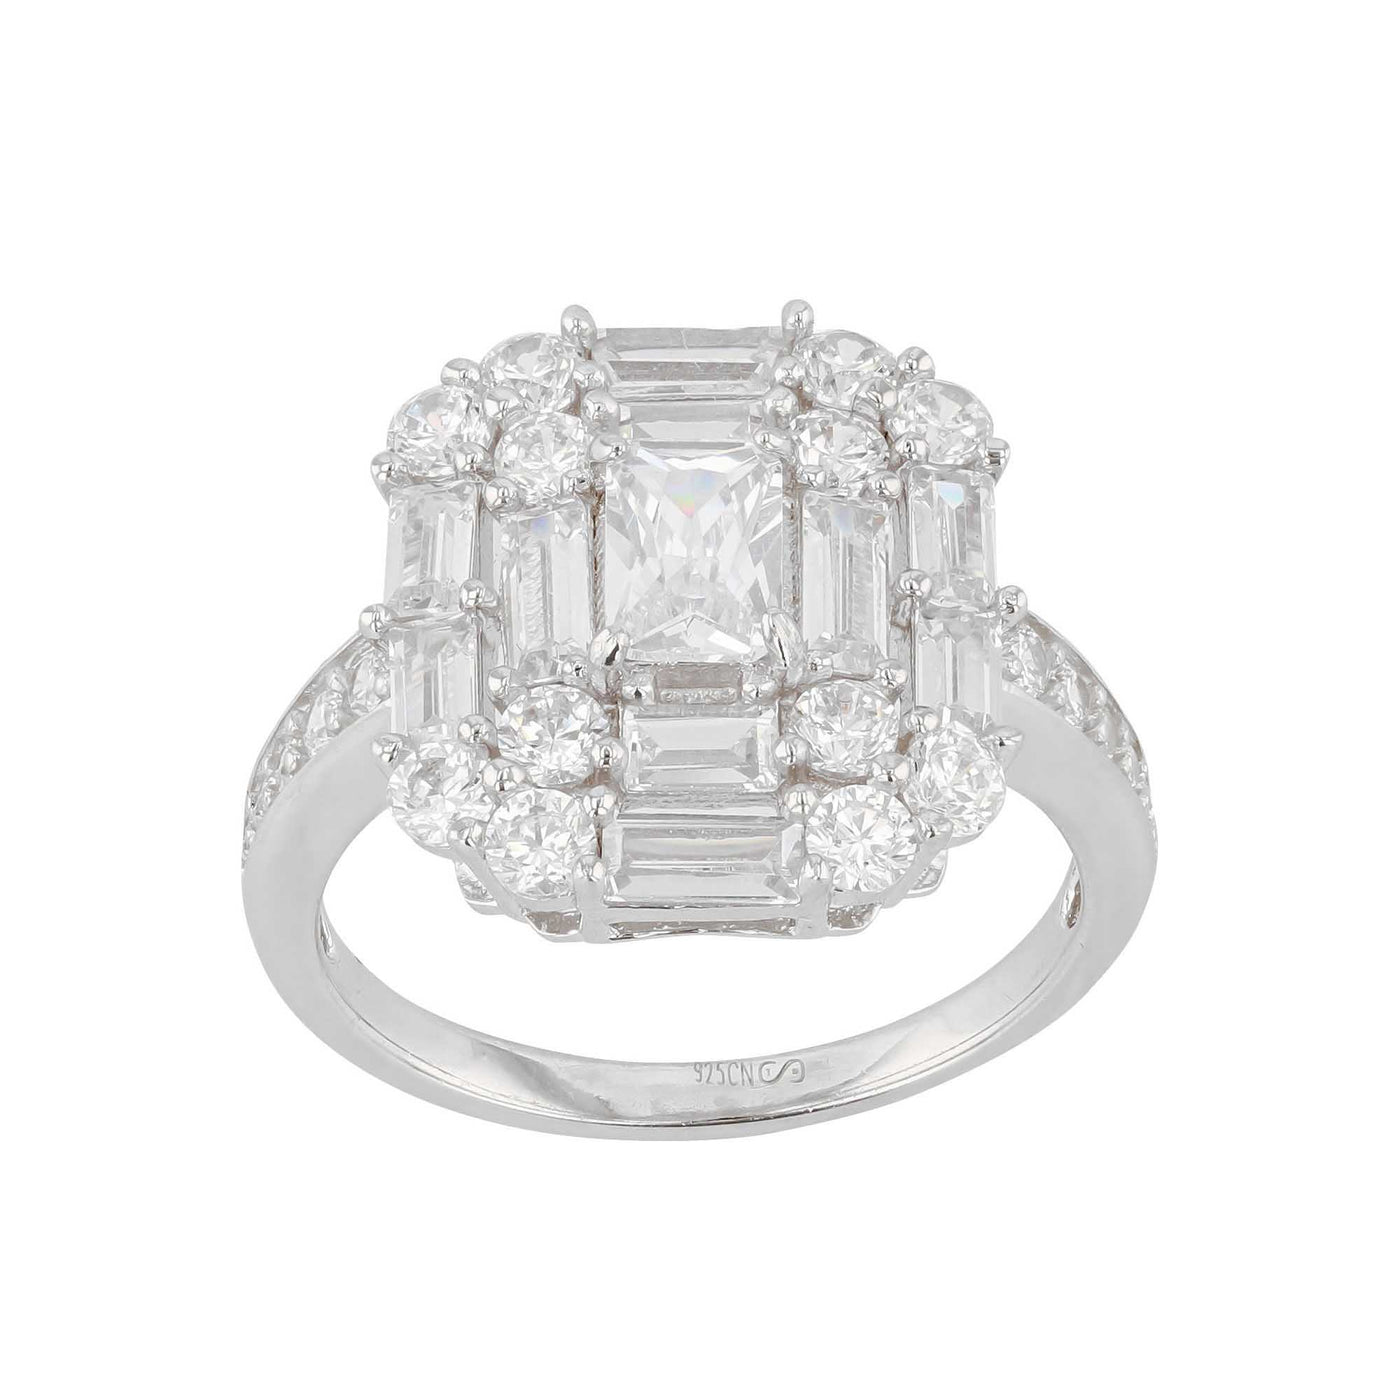 Rebecca Sloane Rhodium Plated Silver Ring with Rectangular CZ